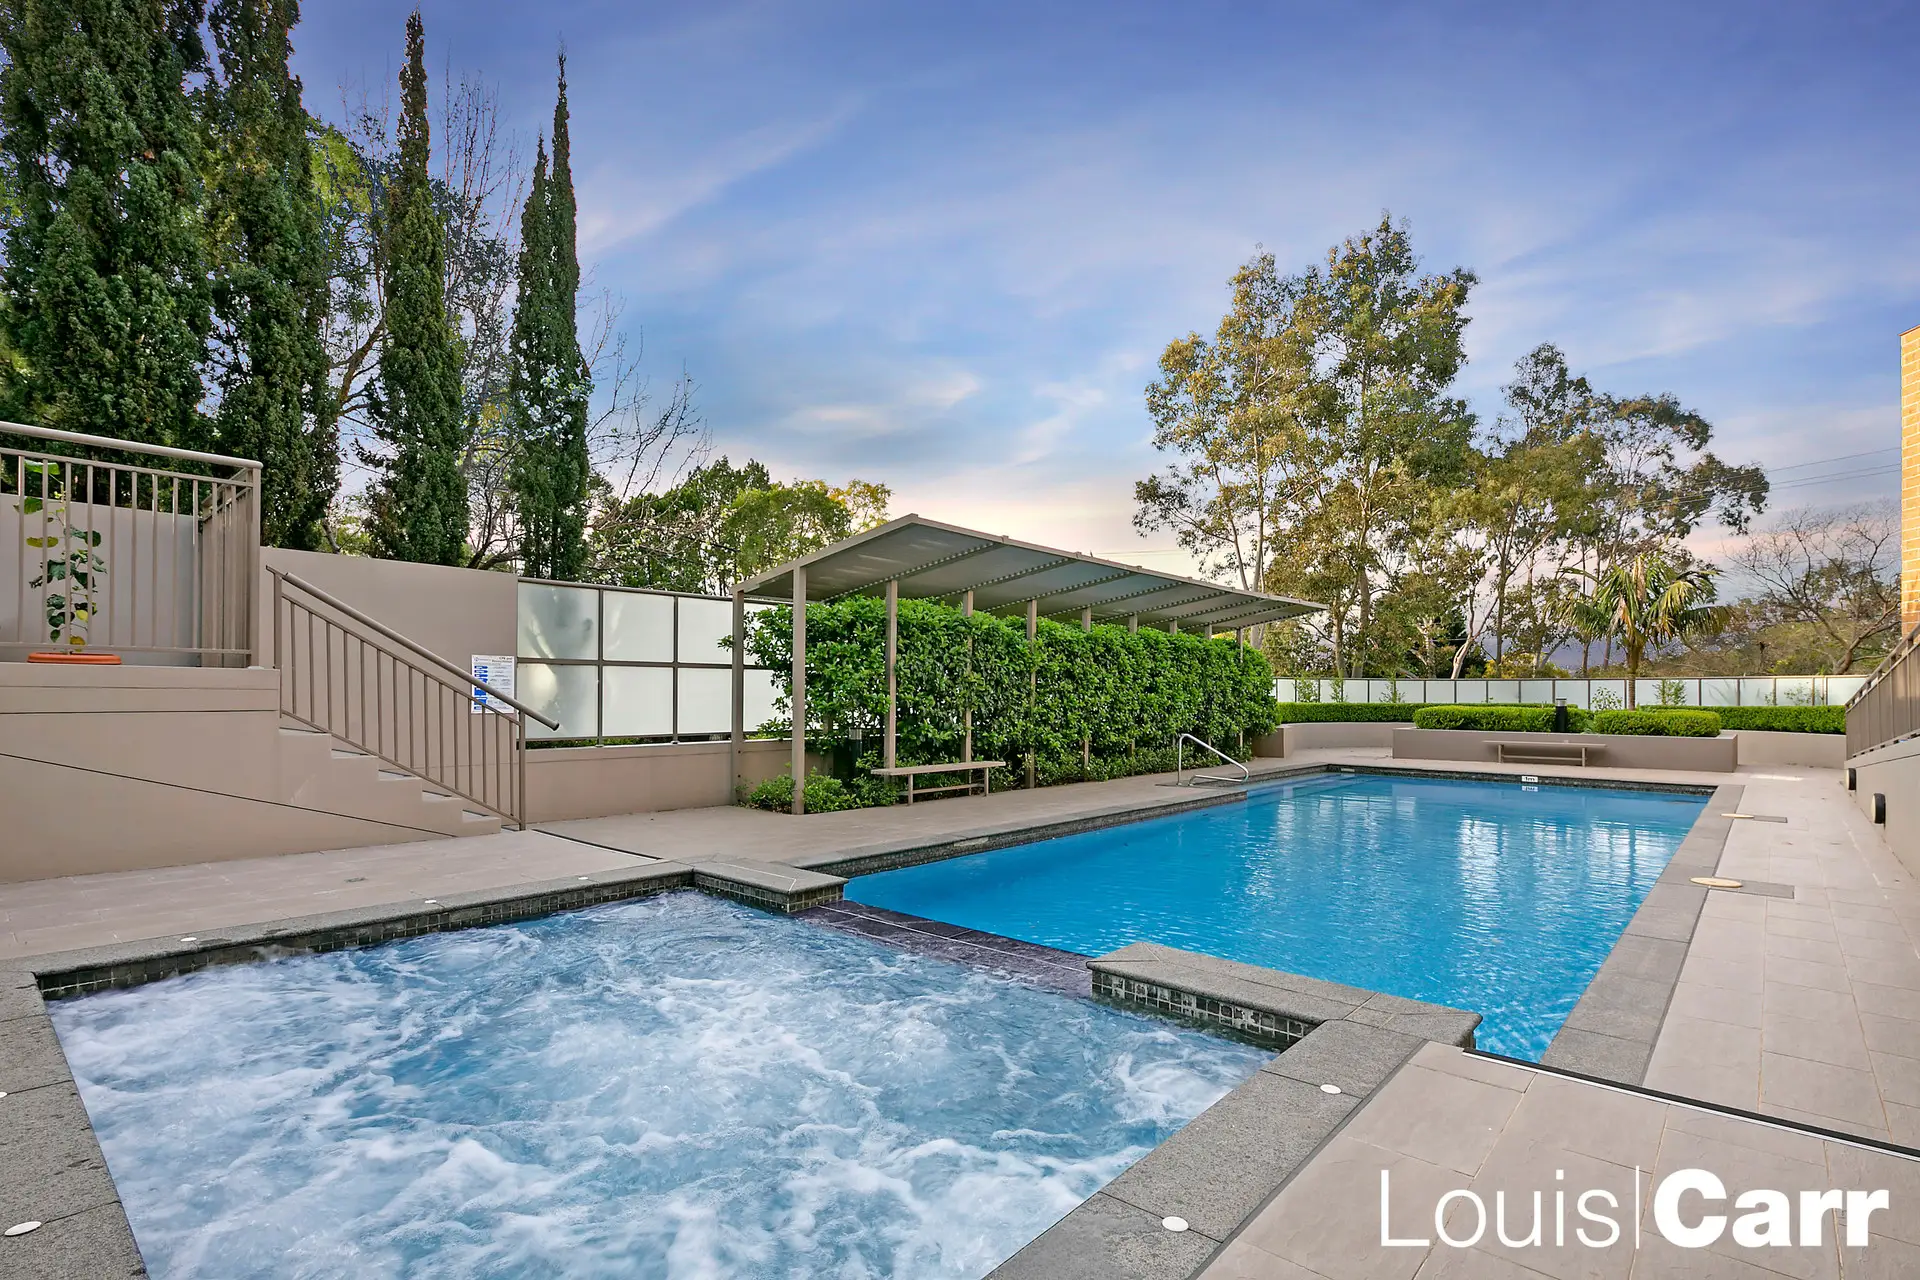 Photo #14: 68/31-39 Sherwin Avenue, Castle Hill - Sold by Louis Carr Real Estate